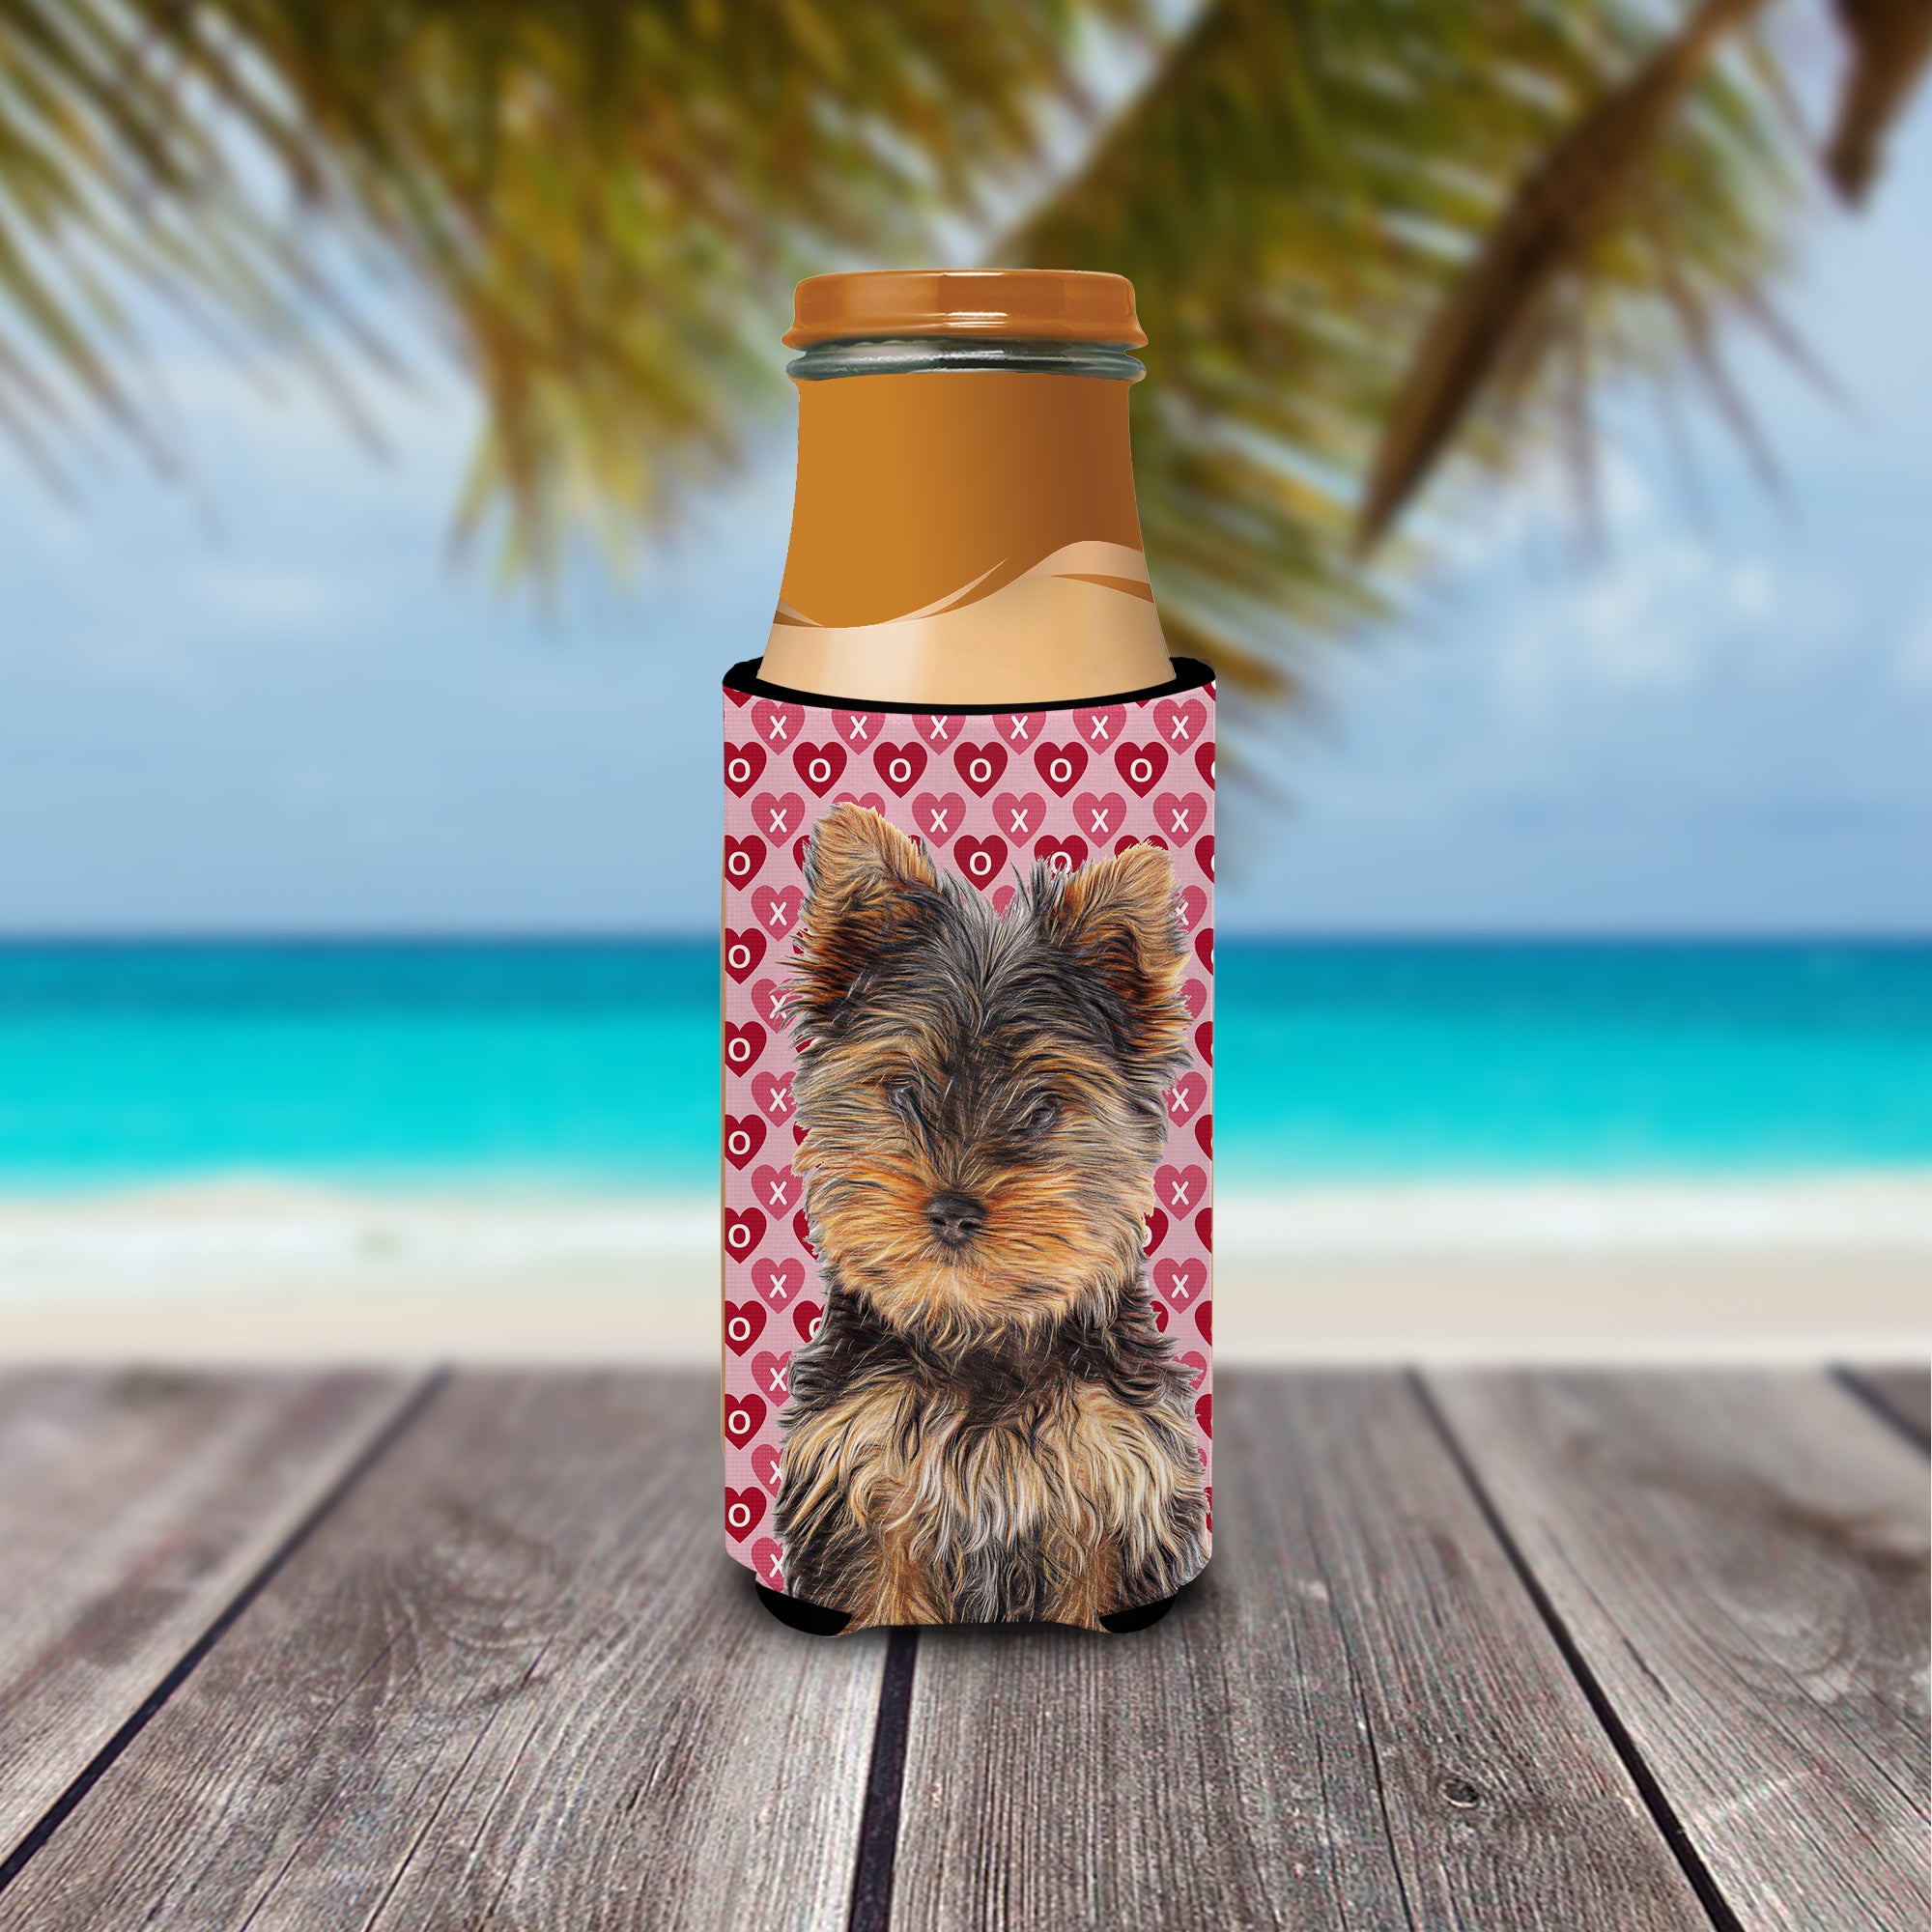 Hearts Love and Valentine's Day Yorkie Puppy / Yorkshire Terrier Ultra Beverage Insulators for slim cans KJ1195MUK.